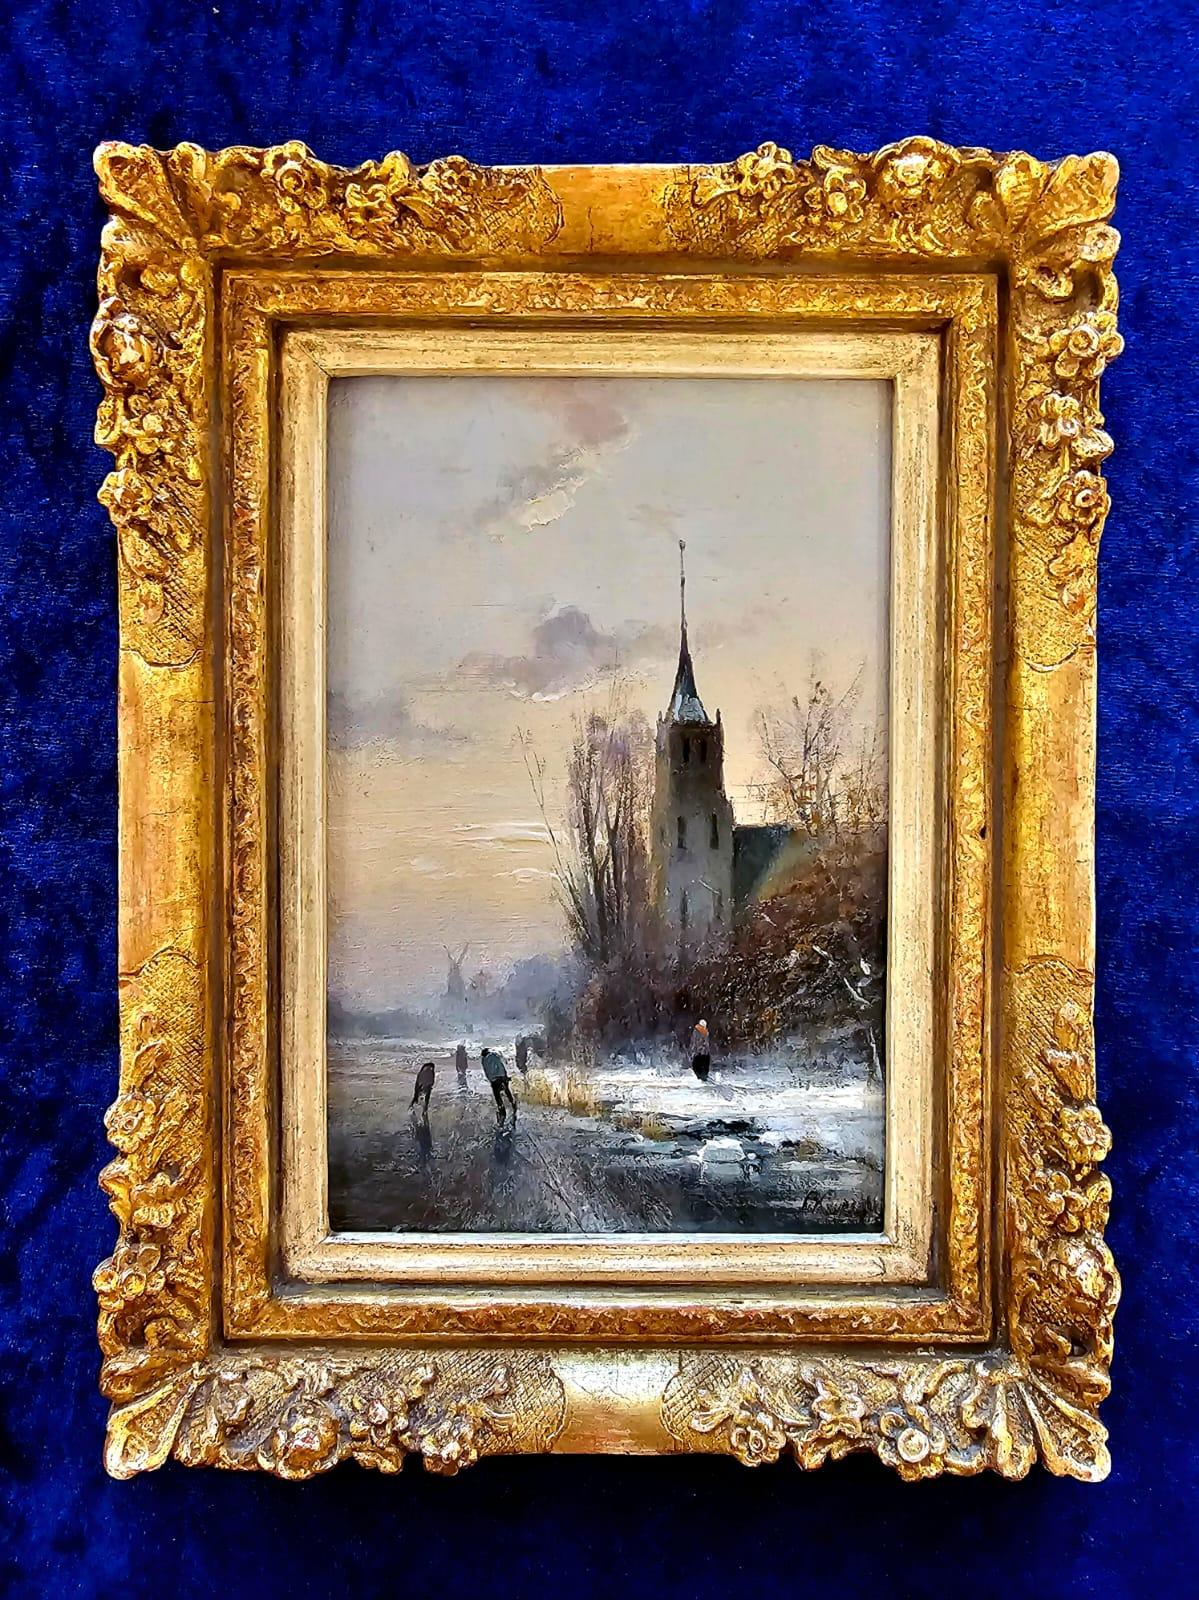 Lovely little painting of a Dutch winter landscape with icescaters and church - Painting by Johannes Petrus Franciskus 'Piet' Kraus